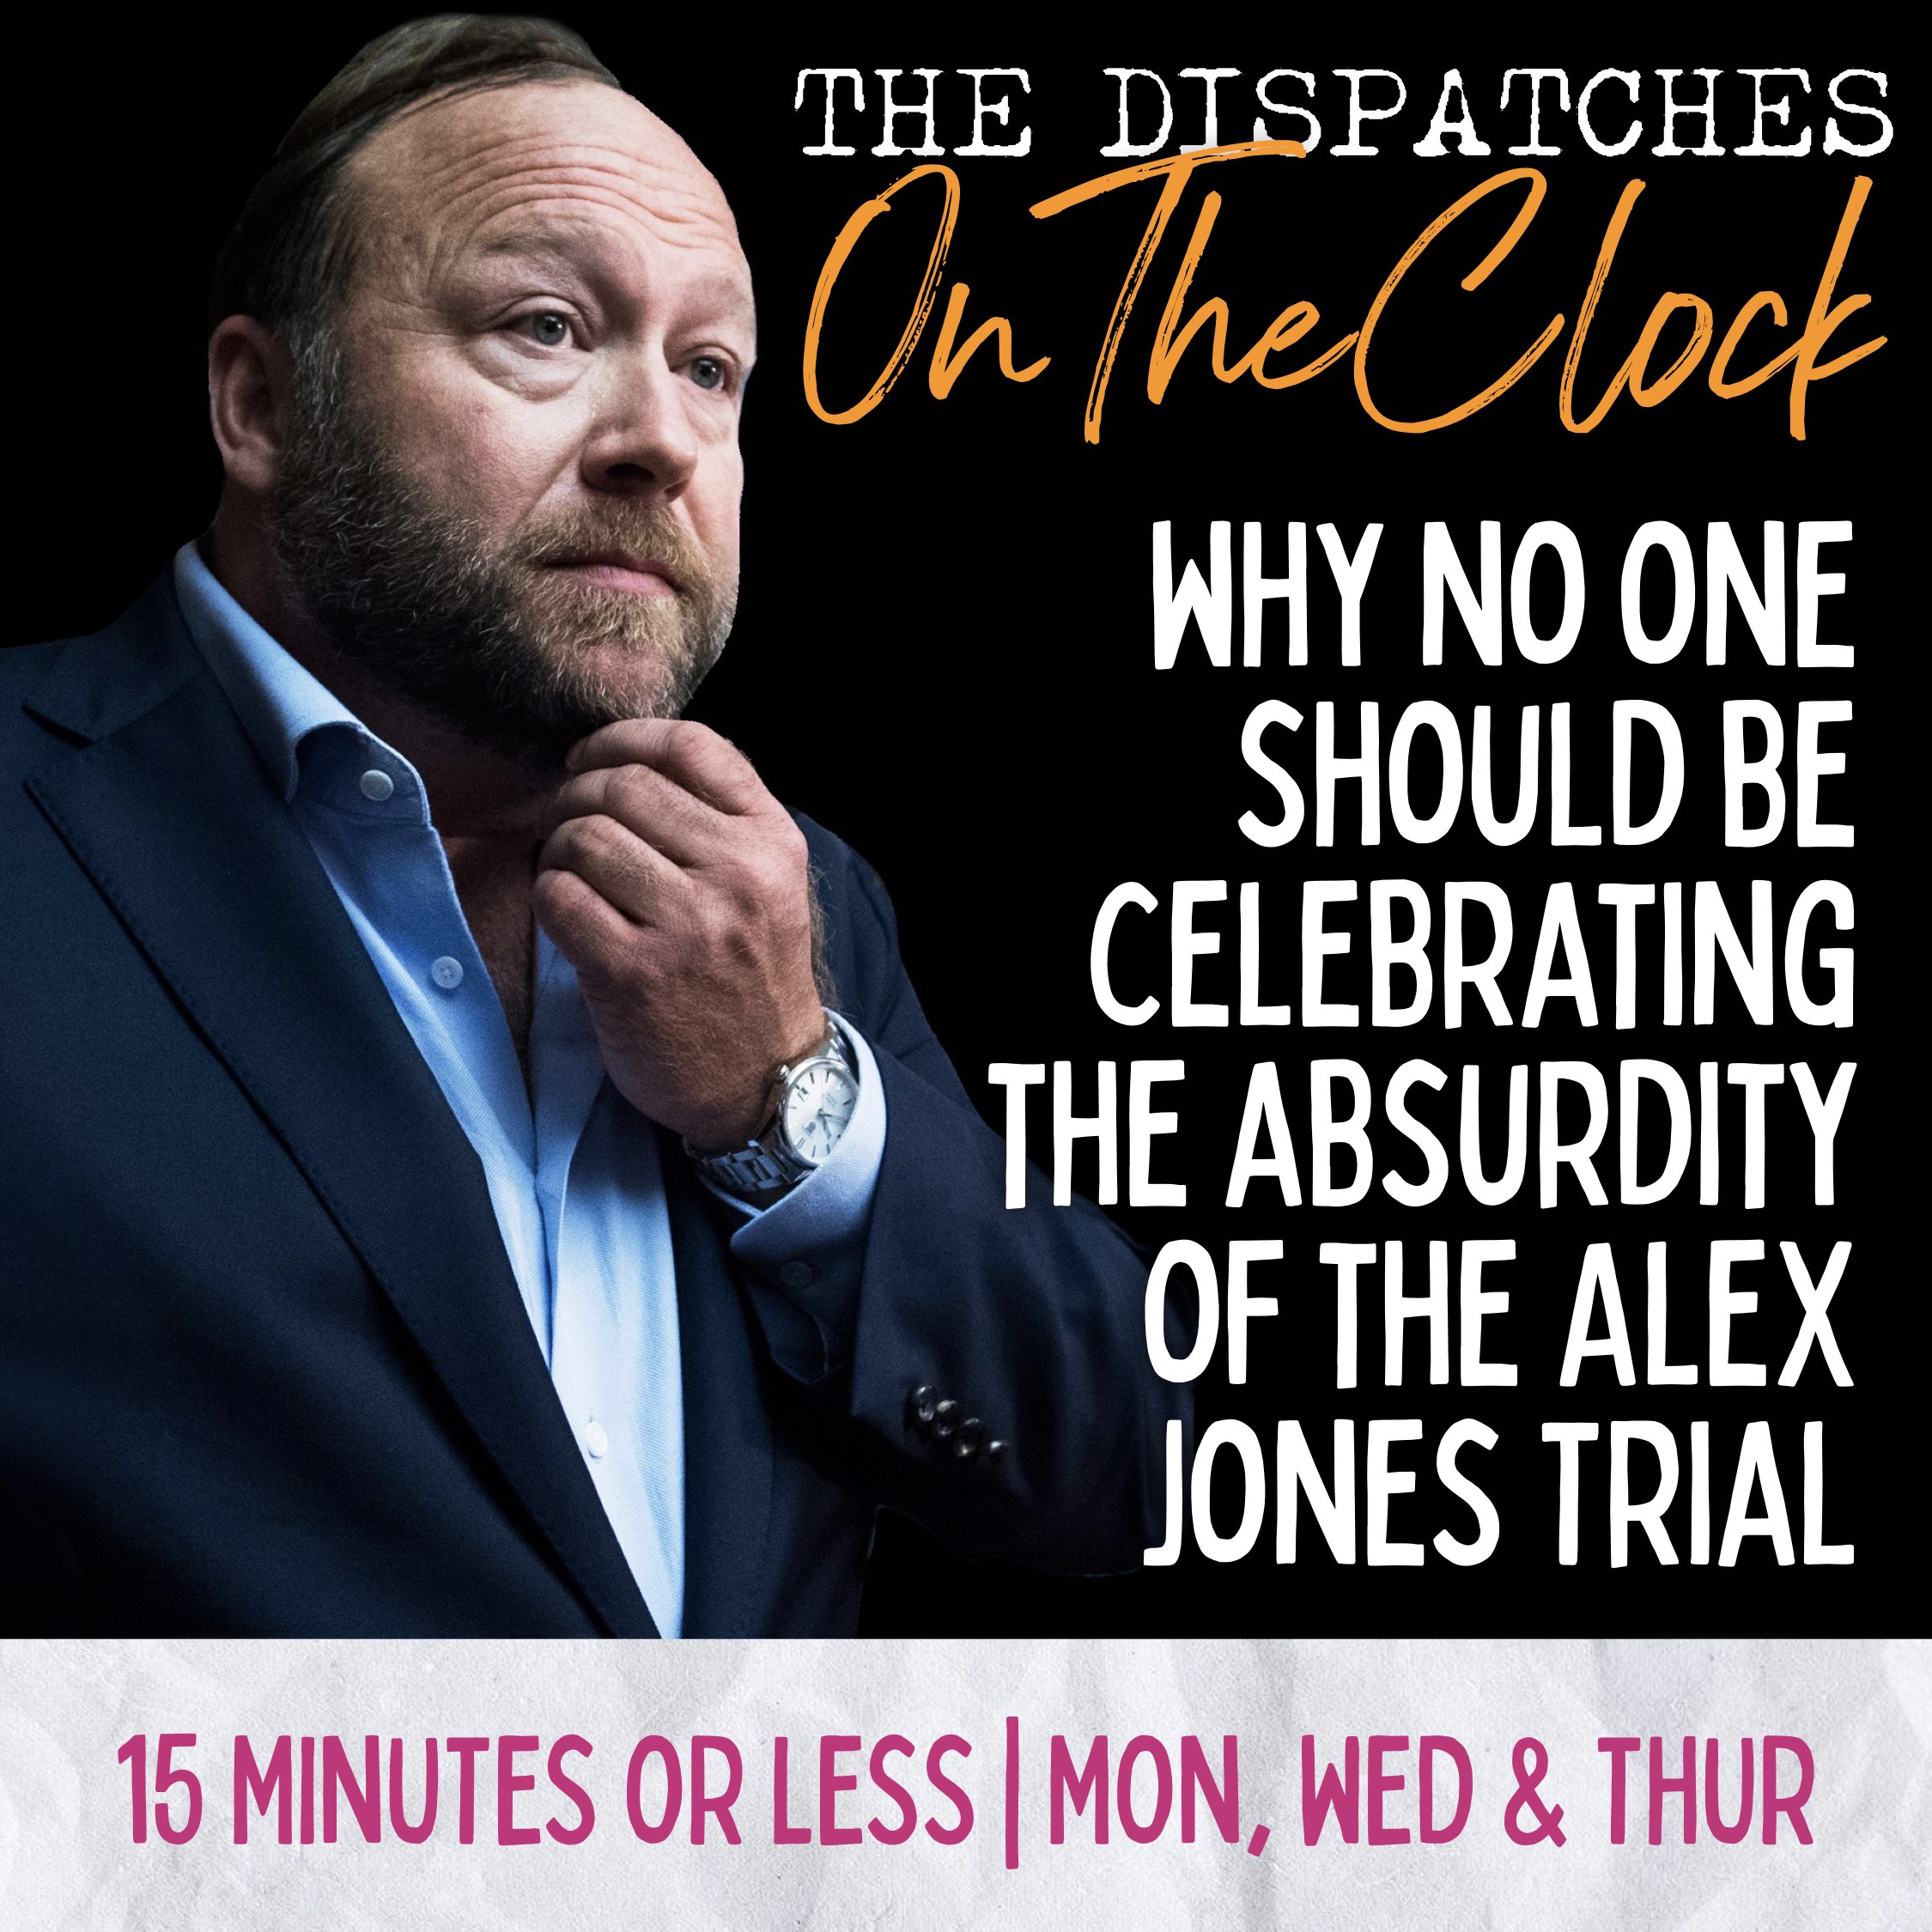 ON THE CLOCK | Why no one Should be Celebrating  the Absurdity of the Alex Jones Trial